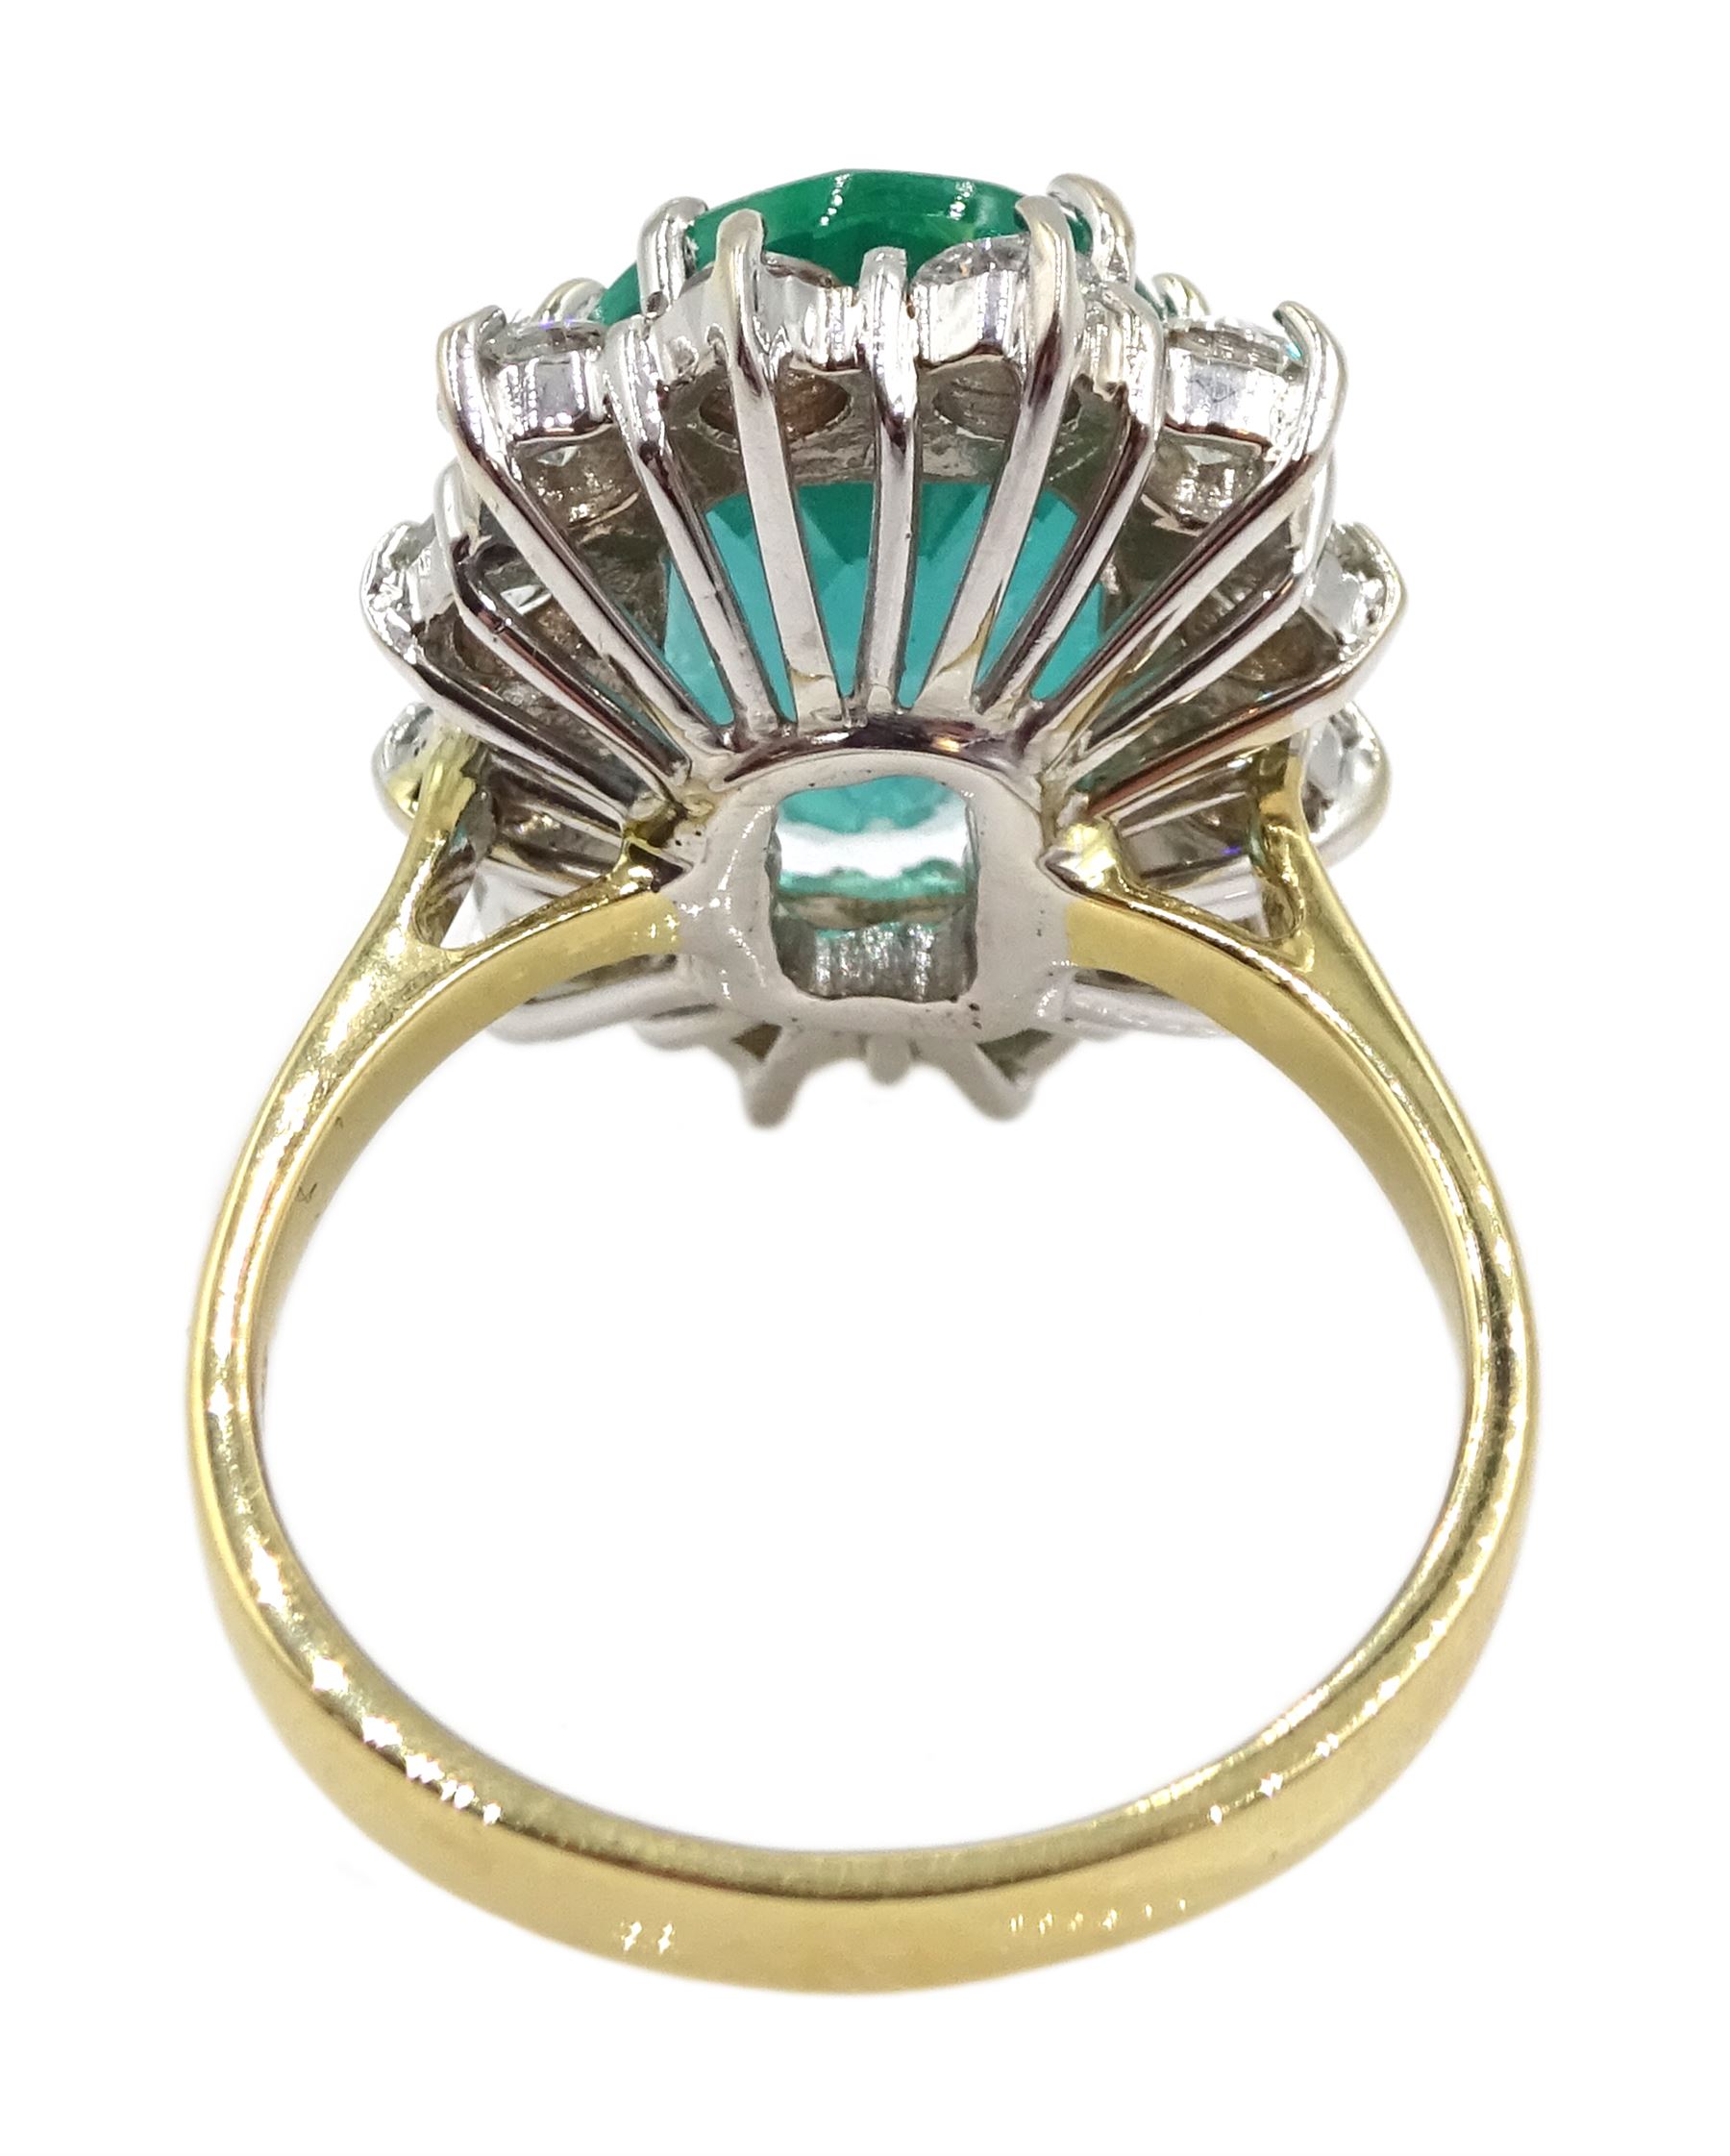 18ct gold oval Zambian emerald and round brilliant cut diamond cluster ring - Image 16 of 16